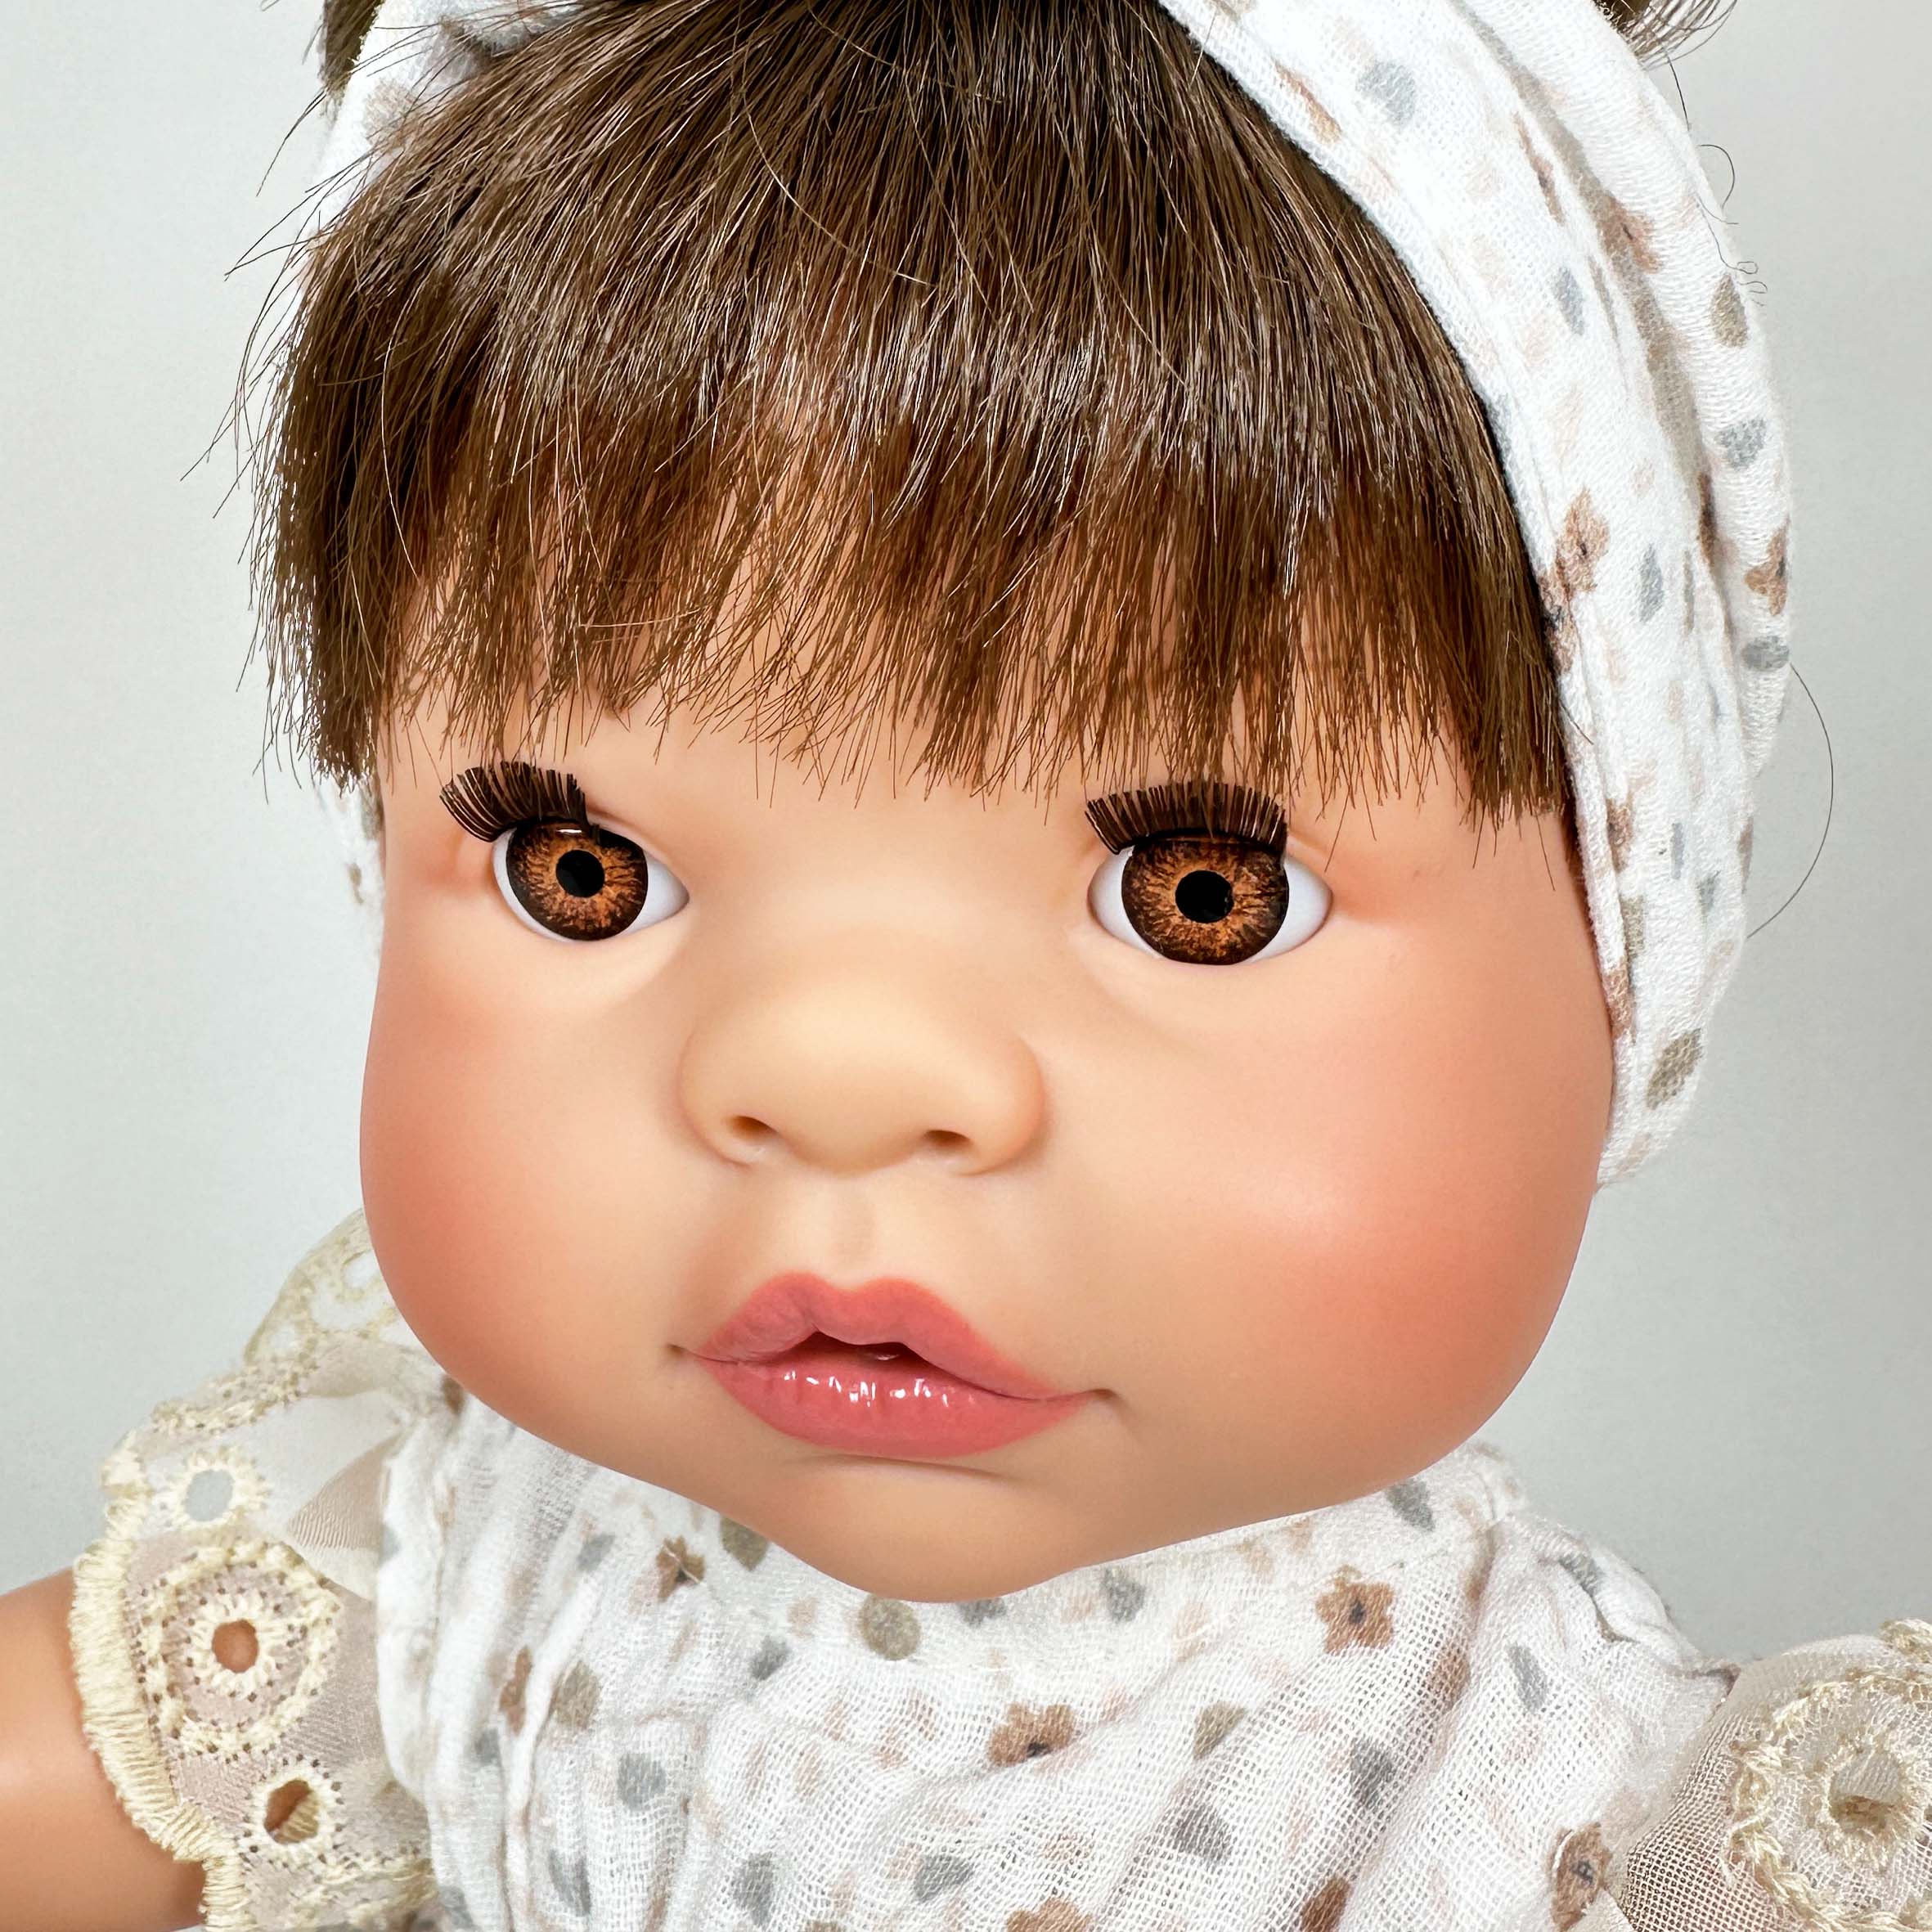 Handmade Collectible Joy Collection Baby Doll (3070) by Nines D&